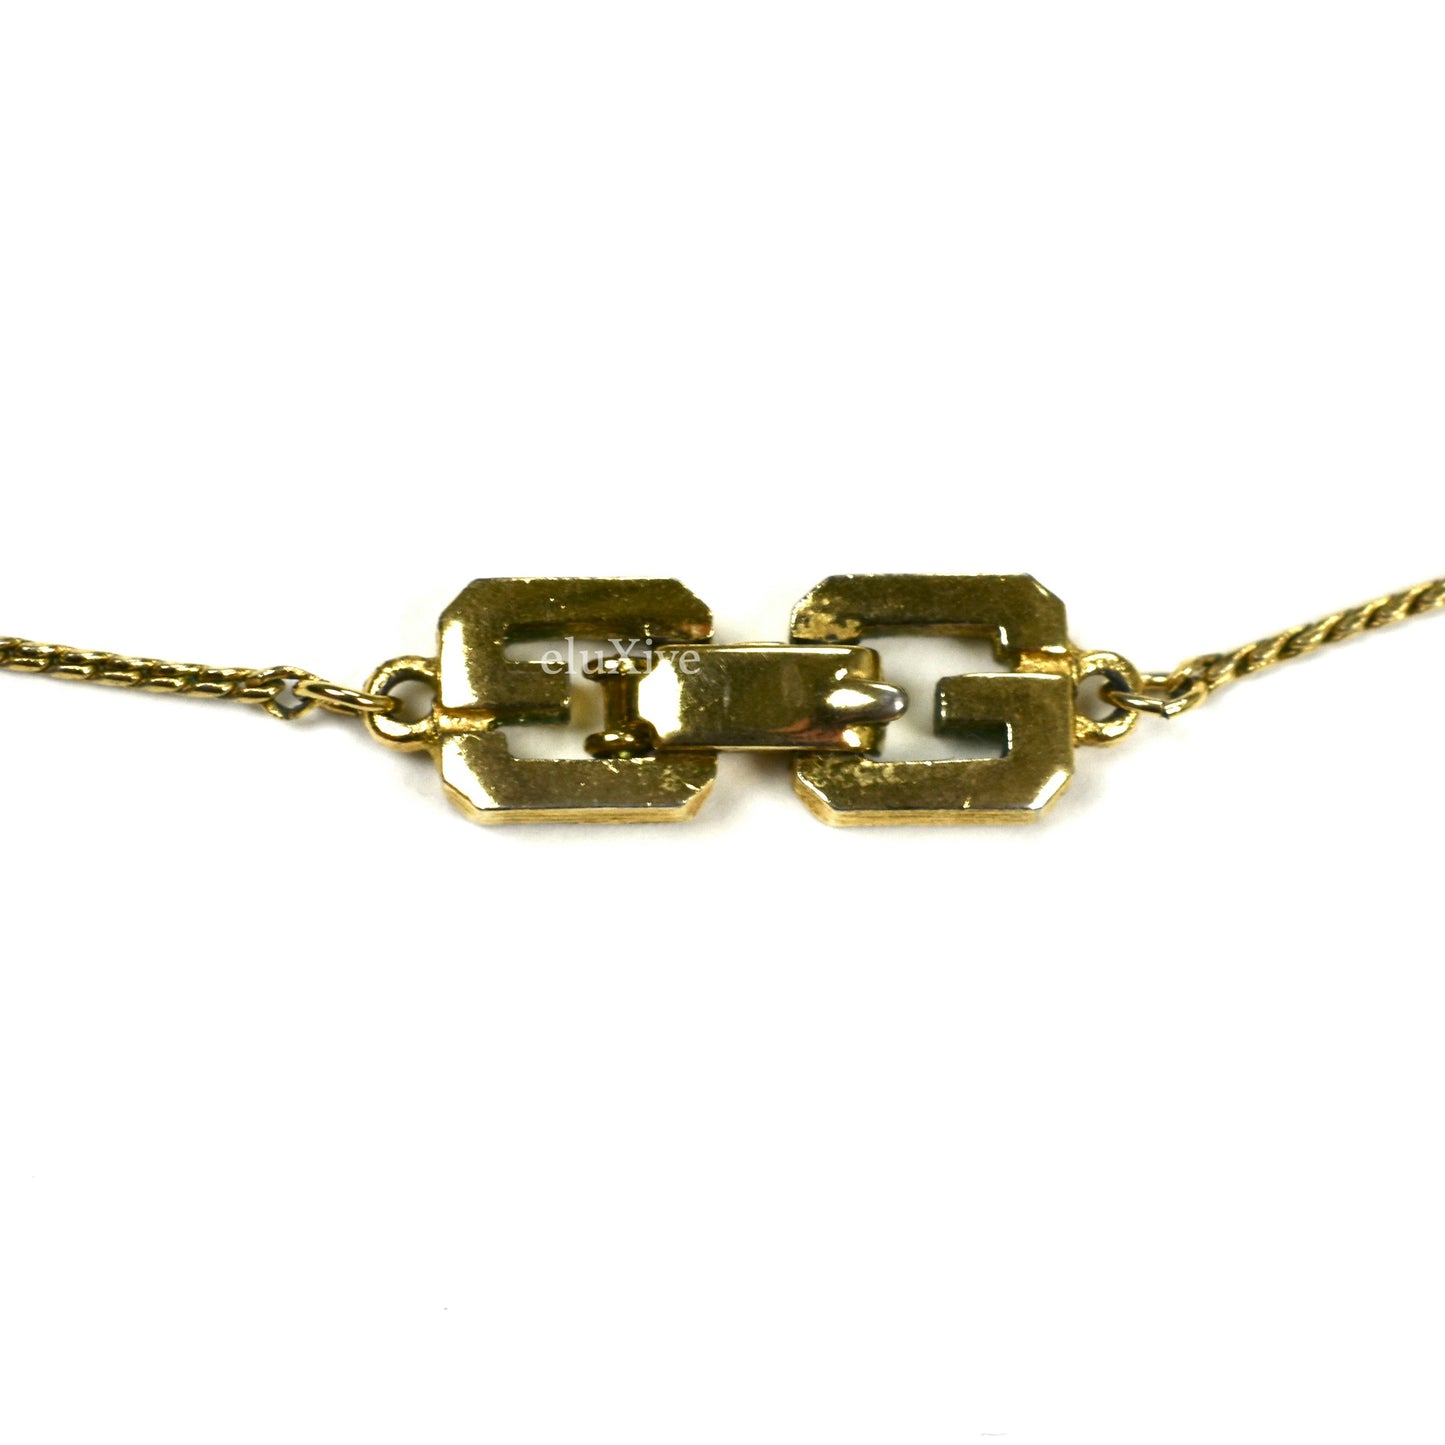 Givenchy - 1979 Runway Gold Square Pendant Chain Necklace